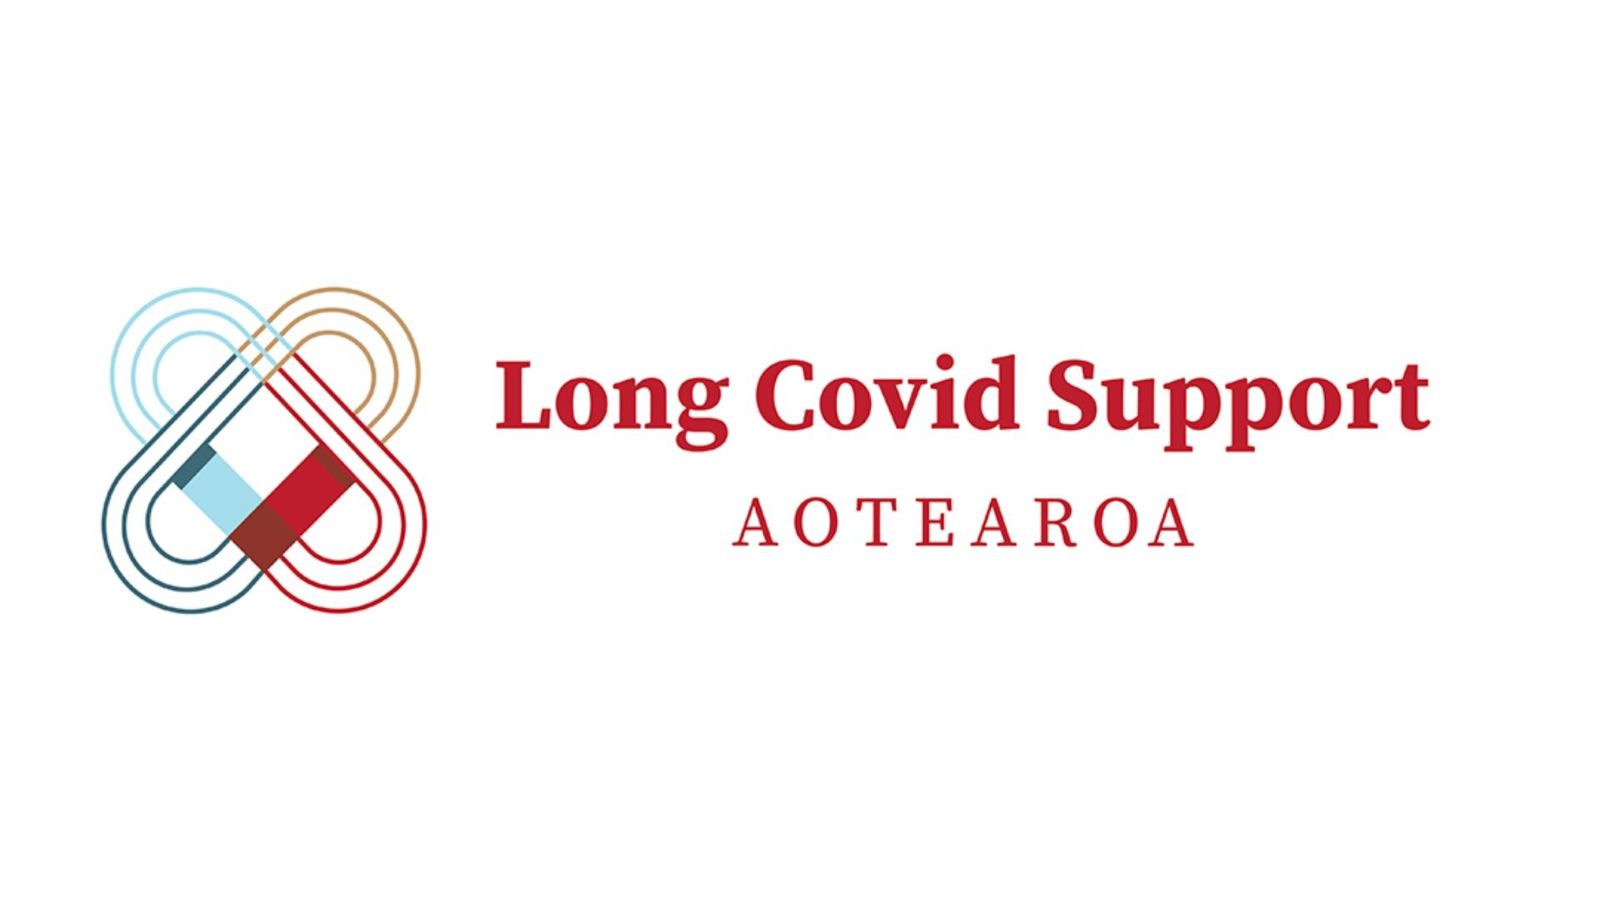 Red writing that states “Long COVID Support Aotearoa”.